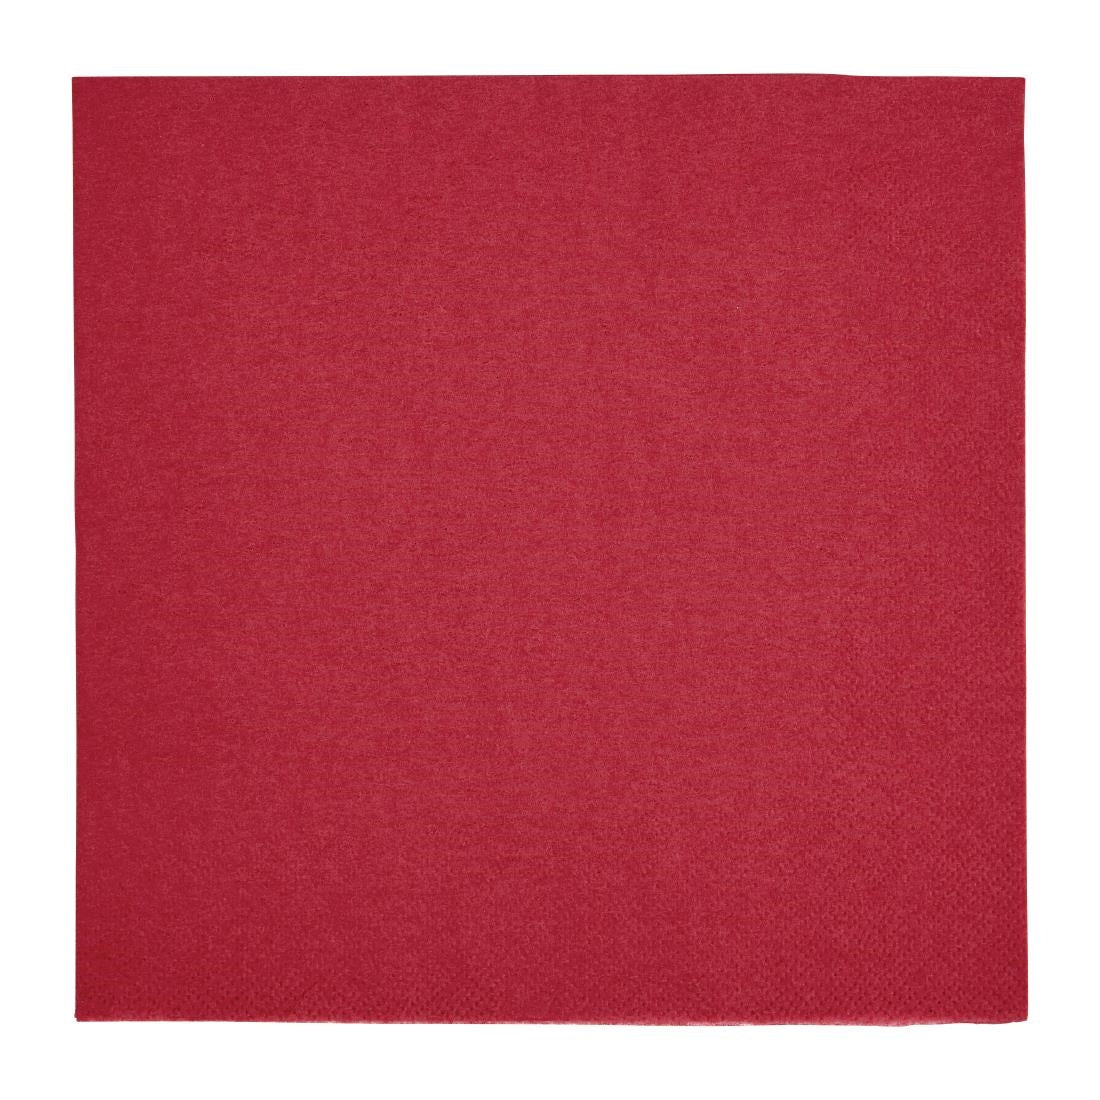 FE237 Fiesta Recyclable Dinner Napkin Bordeaux 40x40cm 2ply 1/4 Fold (Pack of 2000) JD Catering Equipment Solutions Ltd